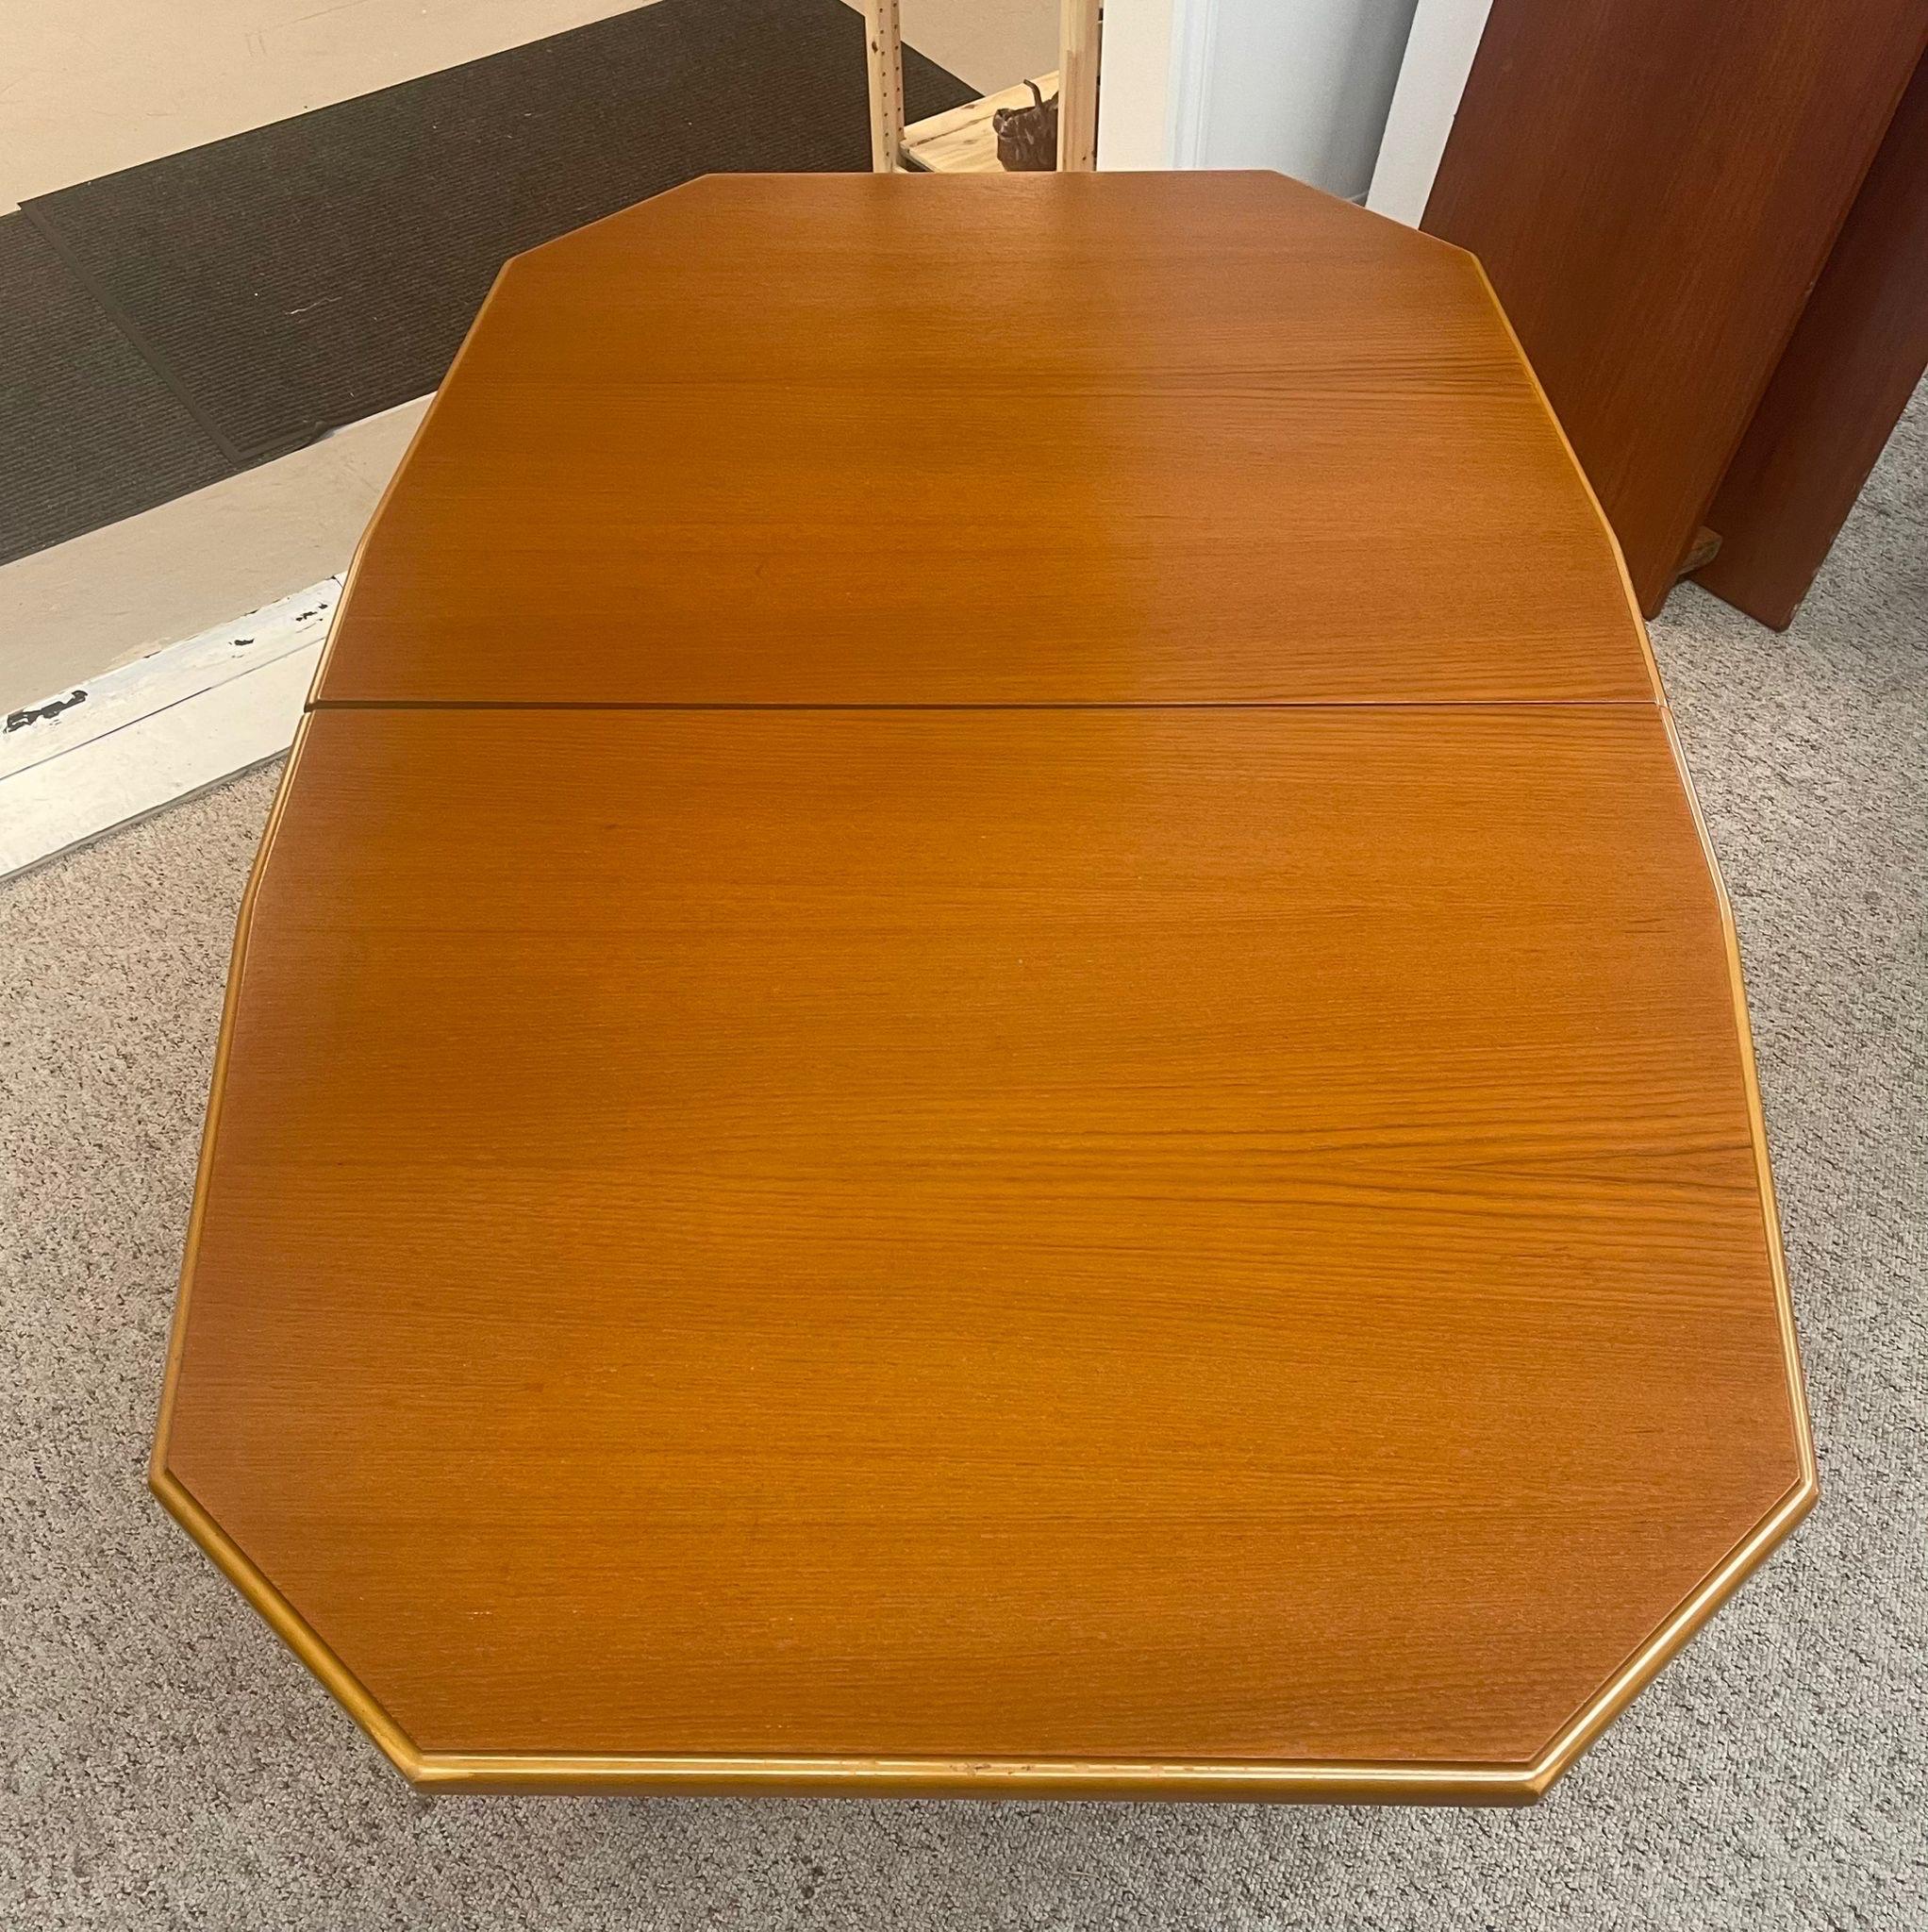 Vintage Mid Century Modern Dining Table With Butterfly Leaf Insert In Good Condition For Sale In Seattle, WA